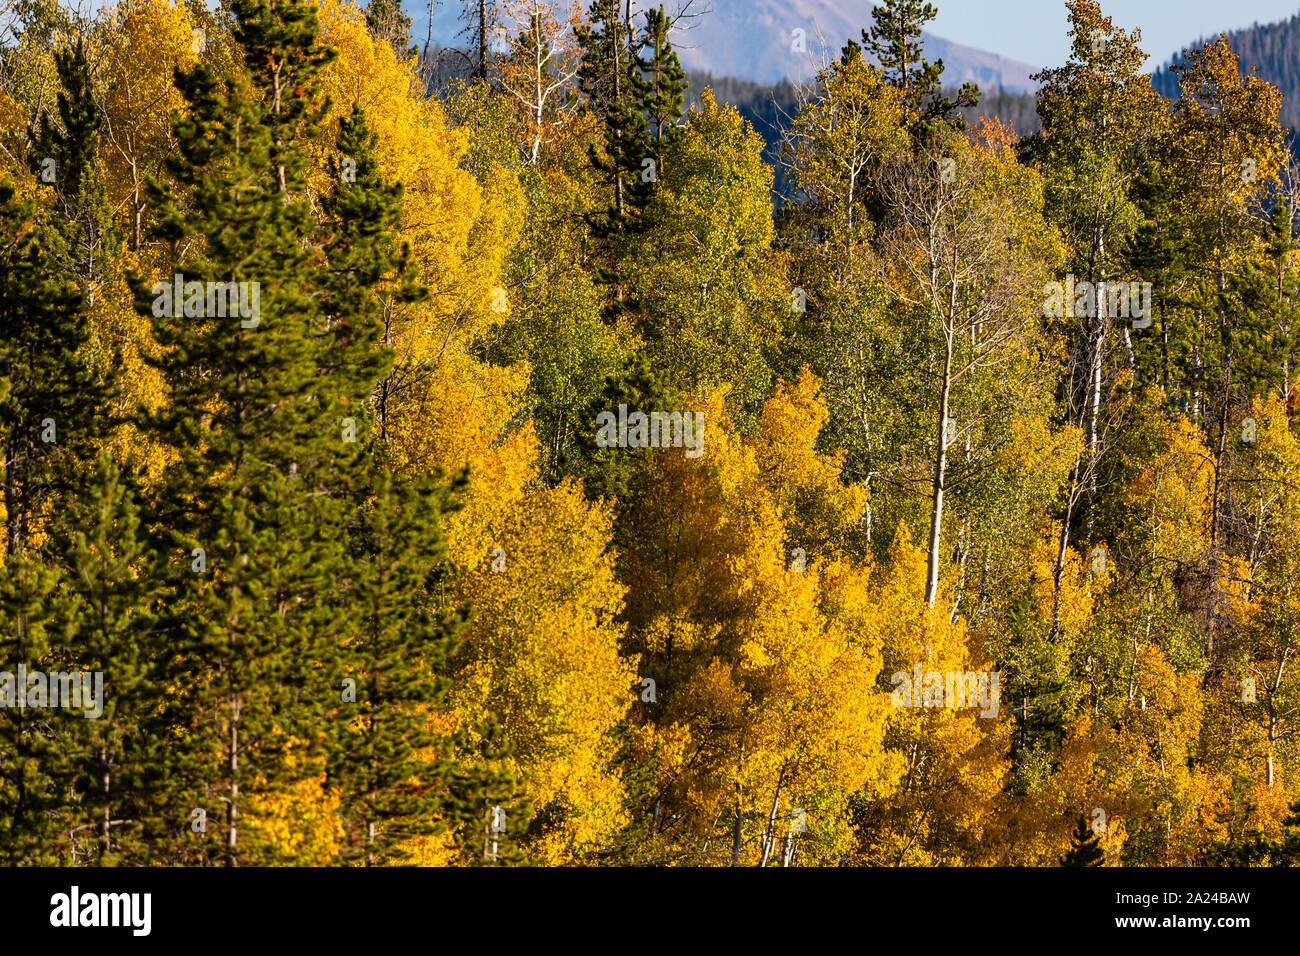 The yellow leaves of the fall season on the aspen trees along the road to the Christmas Meadows area of the north slope of the Uinta Mountains. Stock Photo